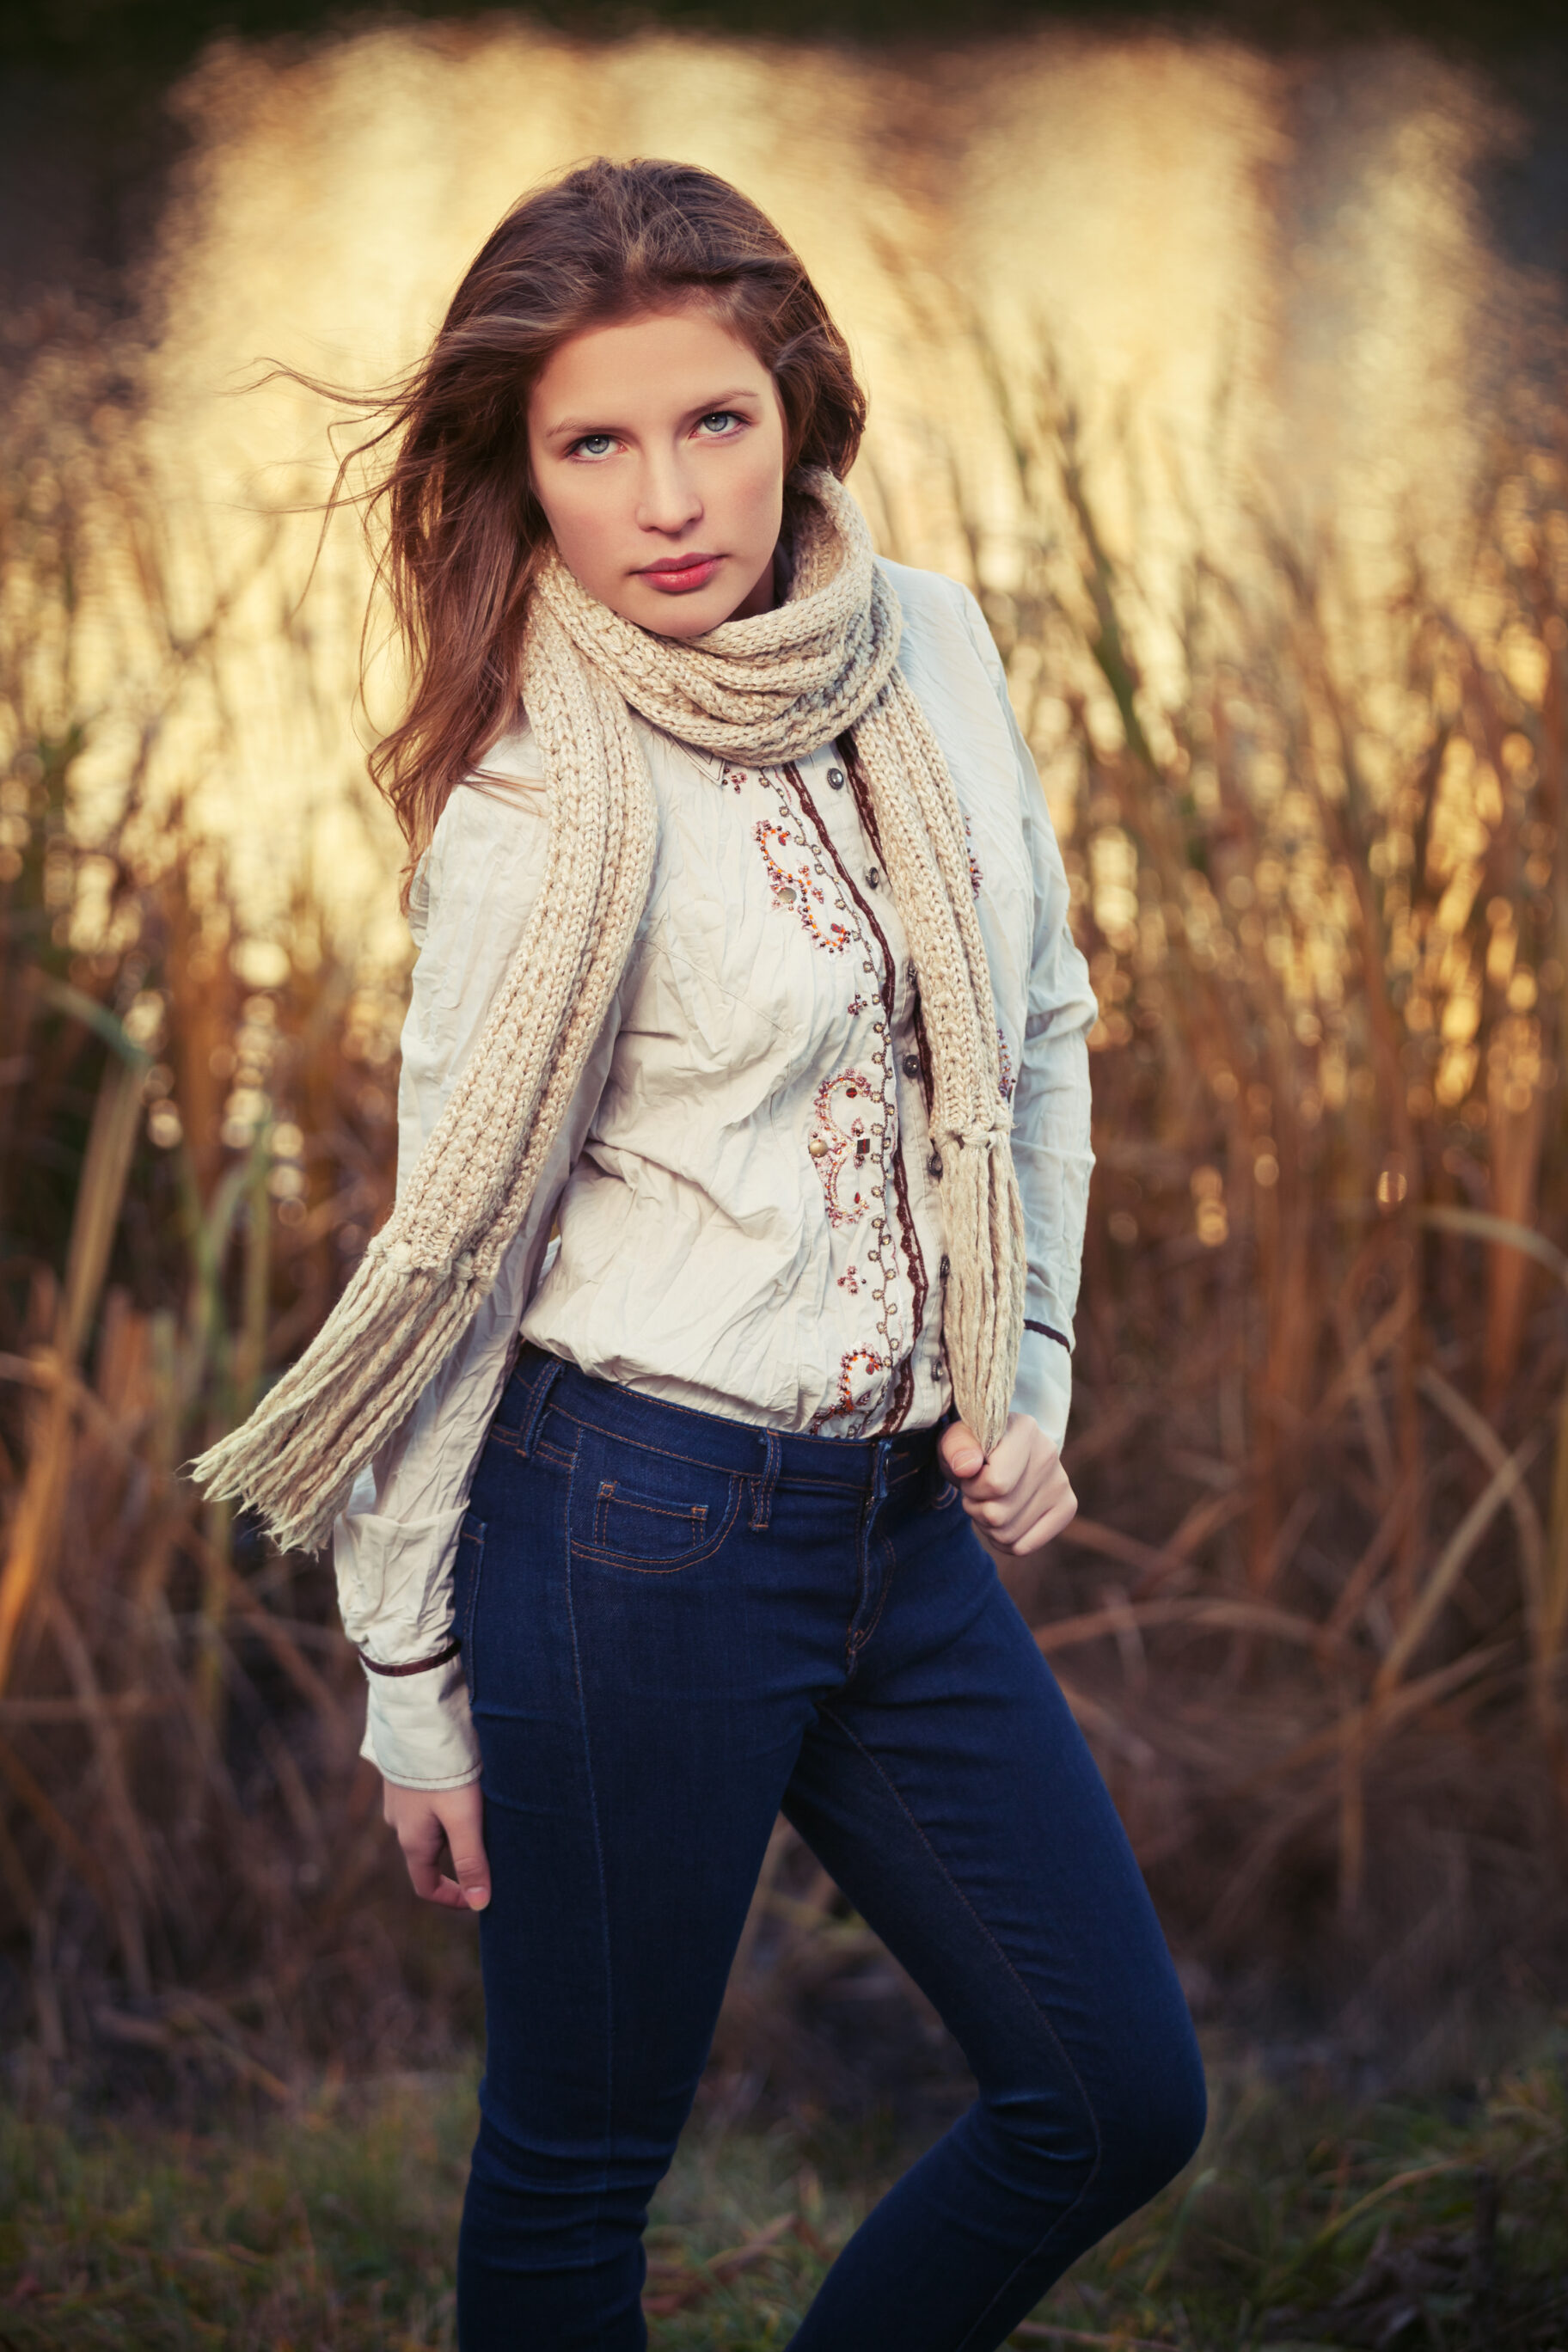 White Shirt, Scarf, And Jeans 